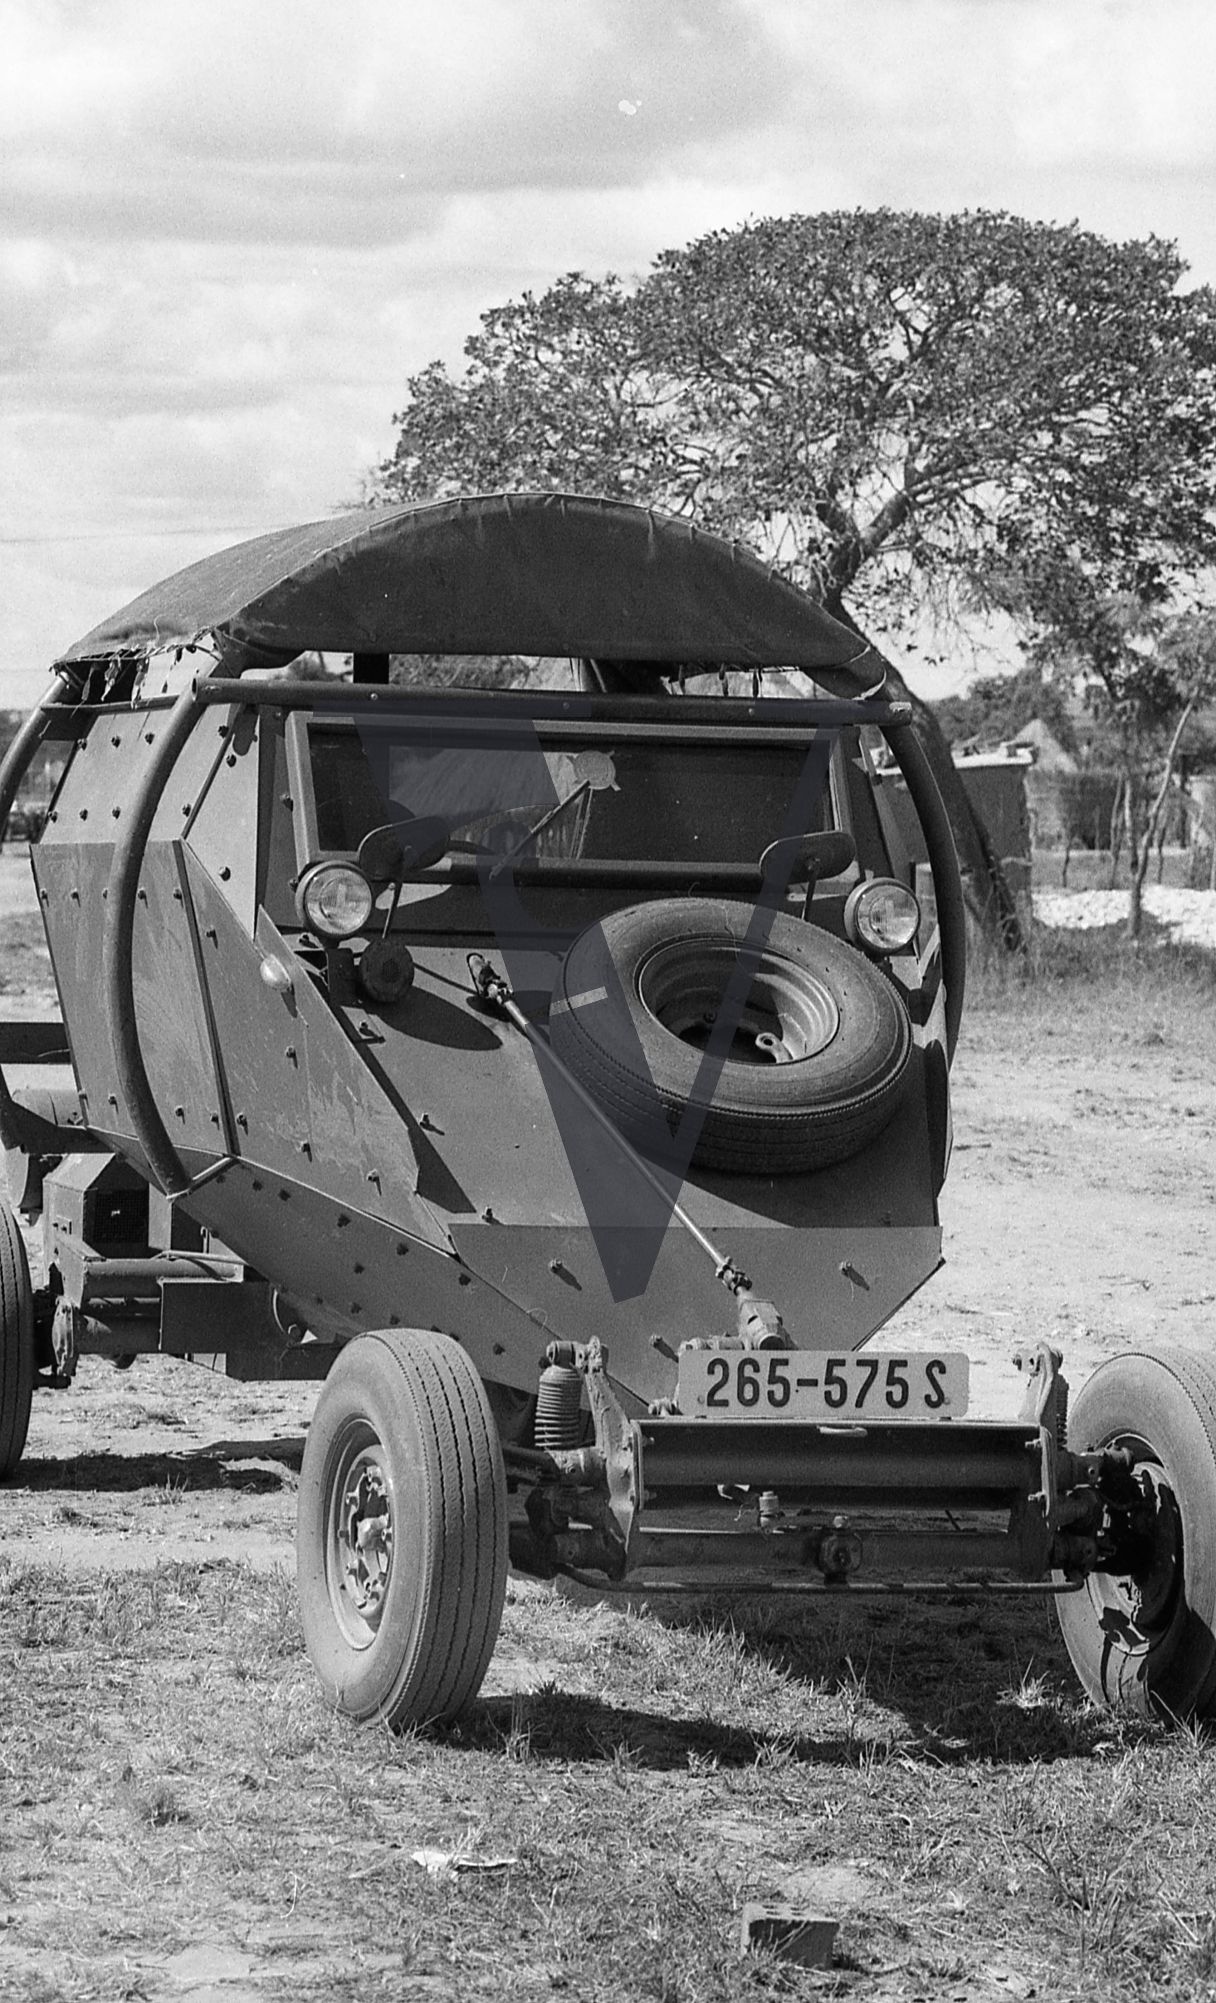 Rhodesia, “protected village”, Leopard Security Vehicle.